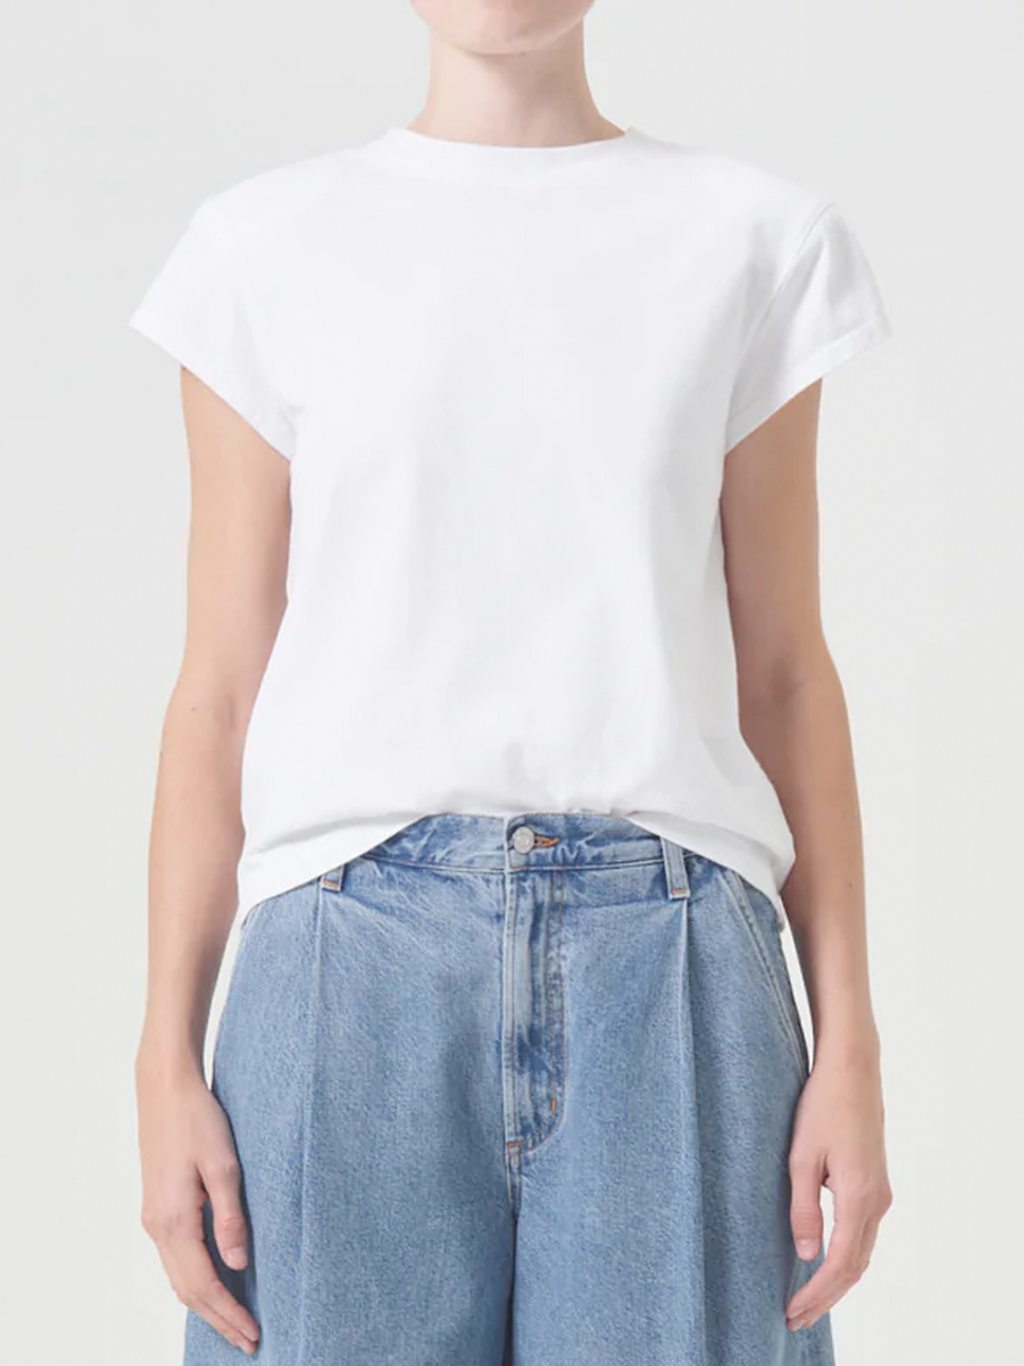 Bryce Shoulder Pad Tee in White